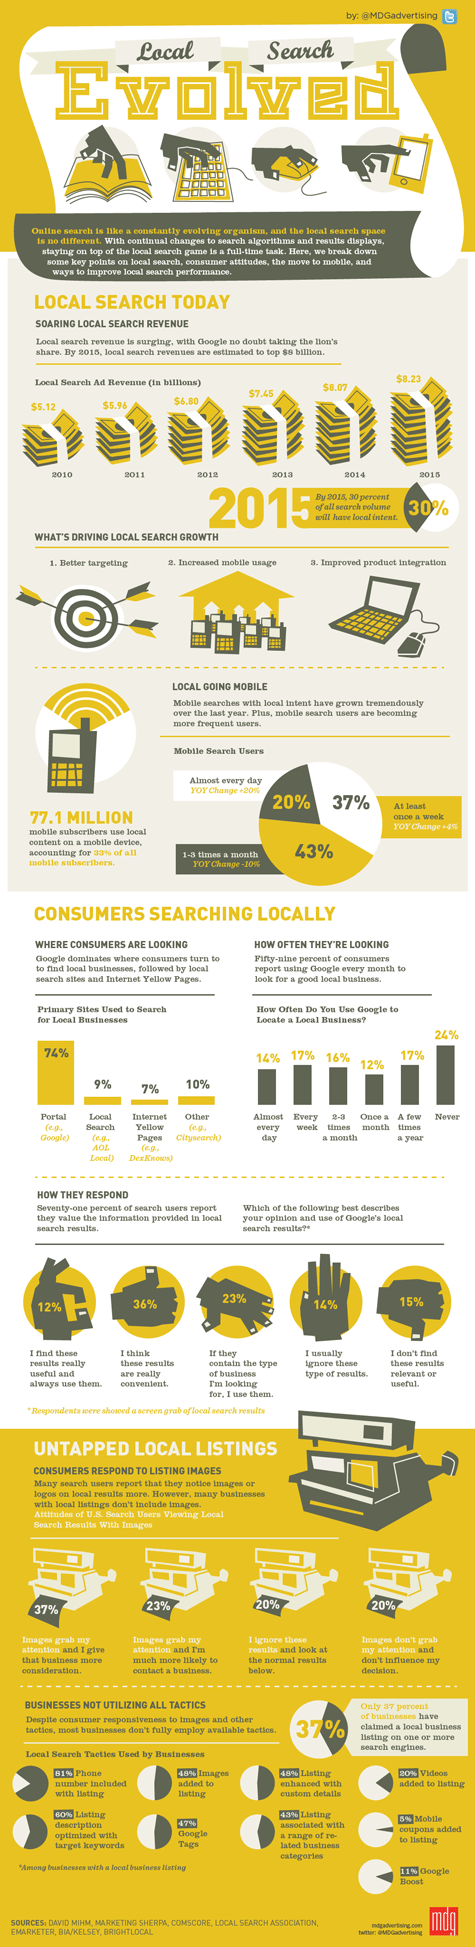 improving local search rate infographic